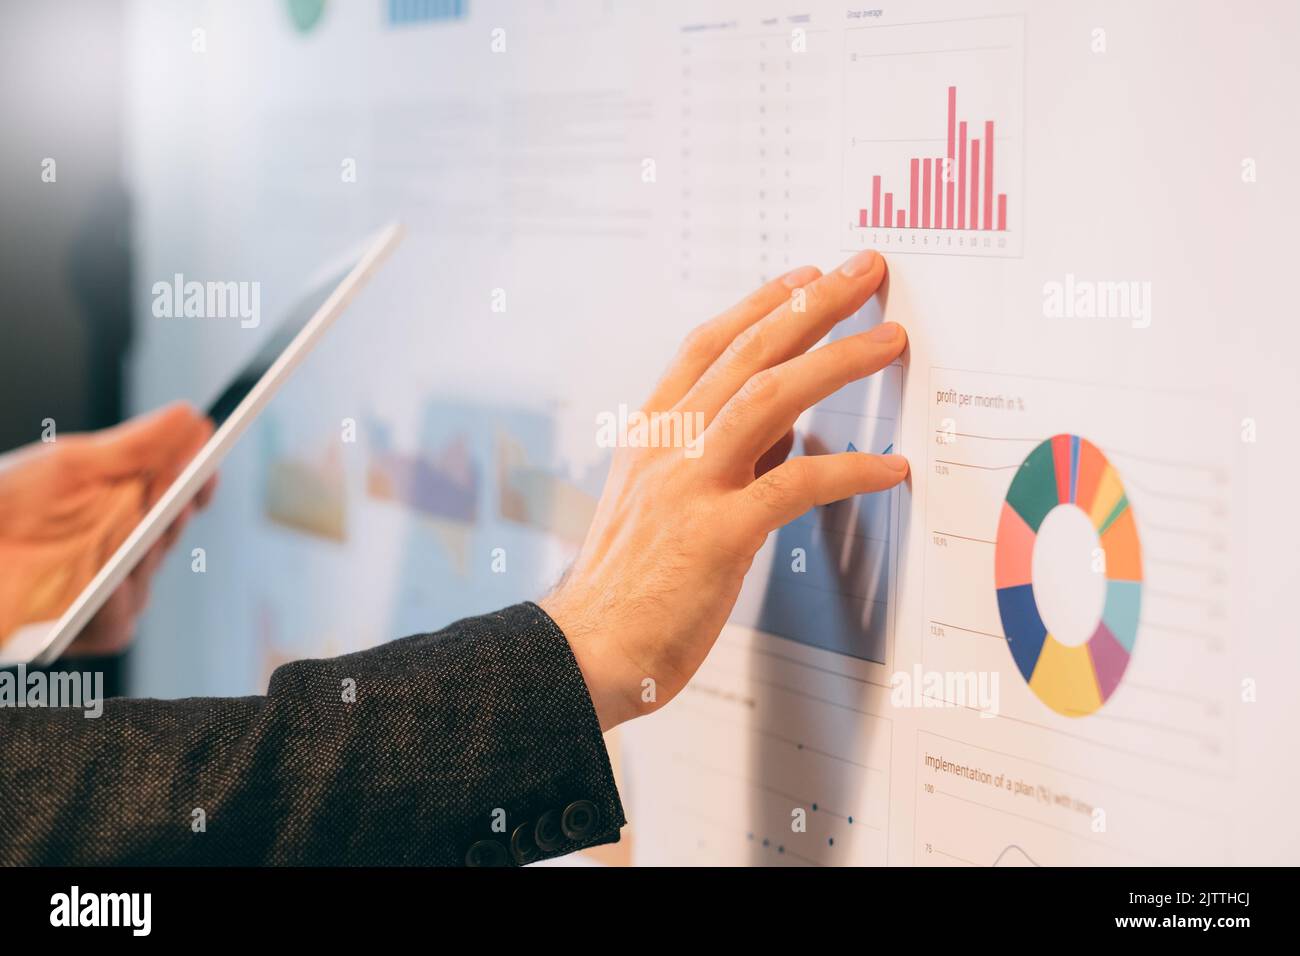 business analyst studying company growth rates Stock Photo